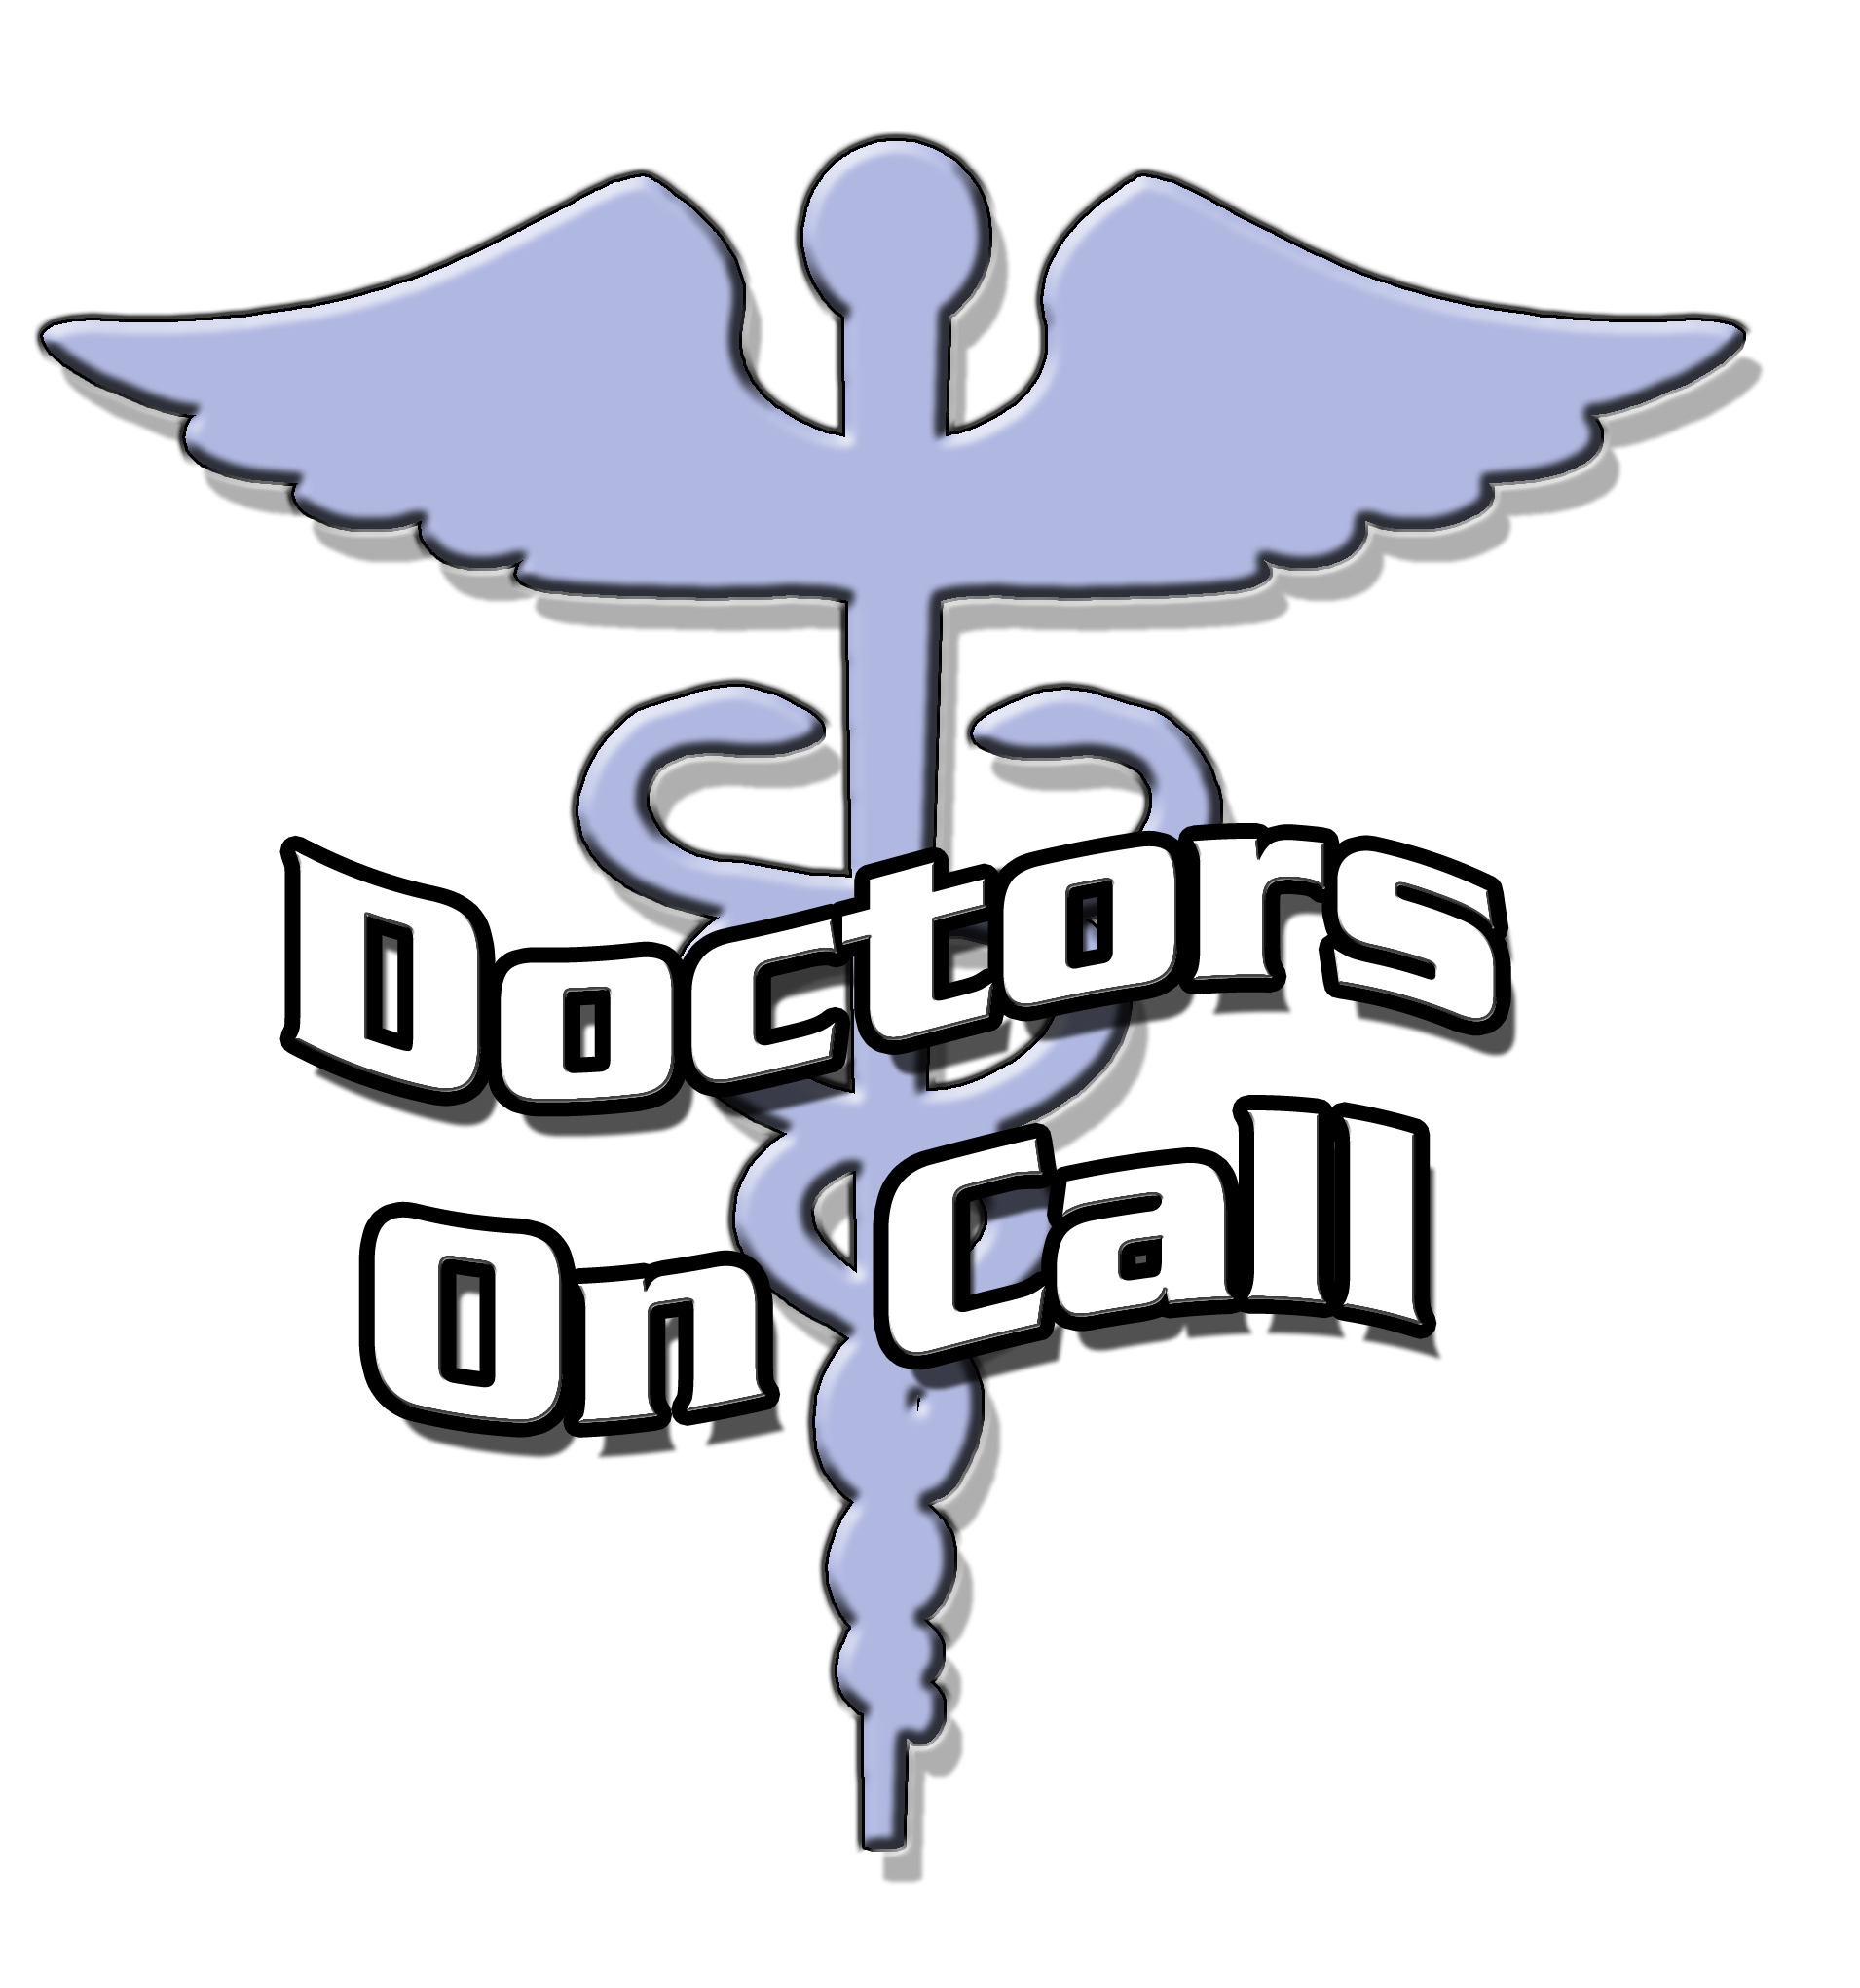 Doctors on Call welcomes the 19th season